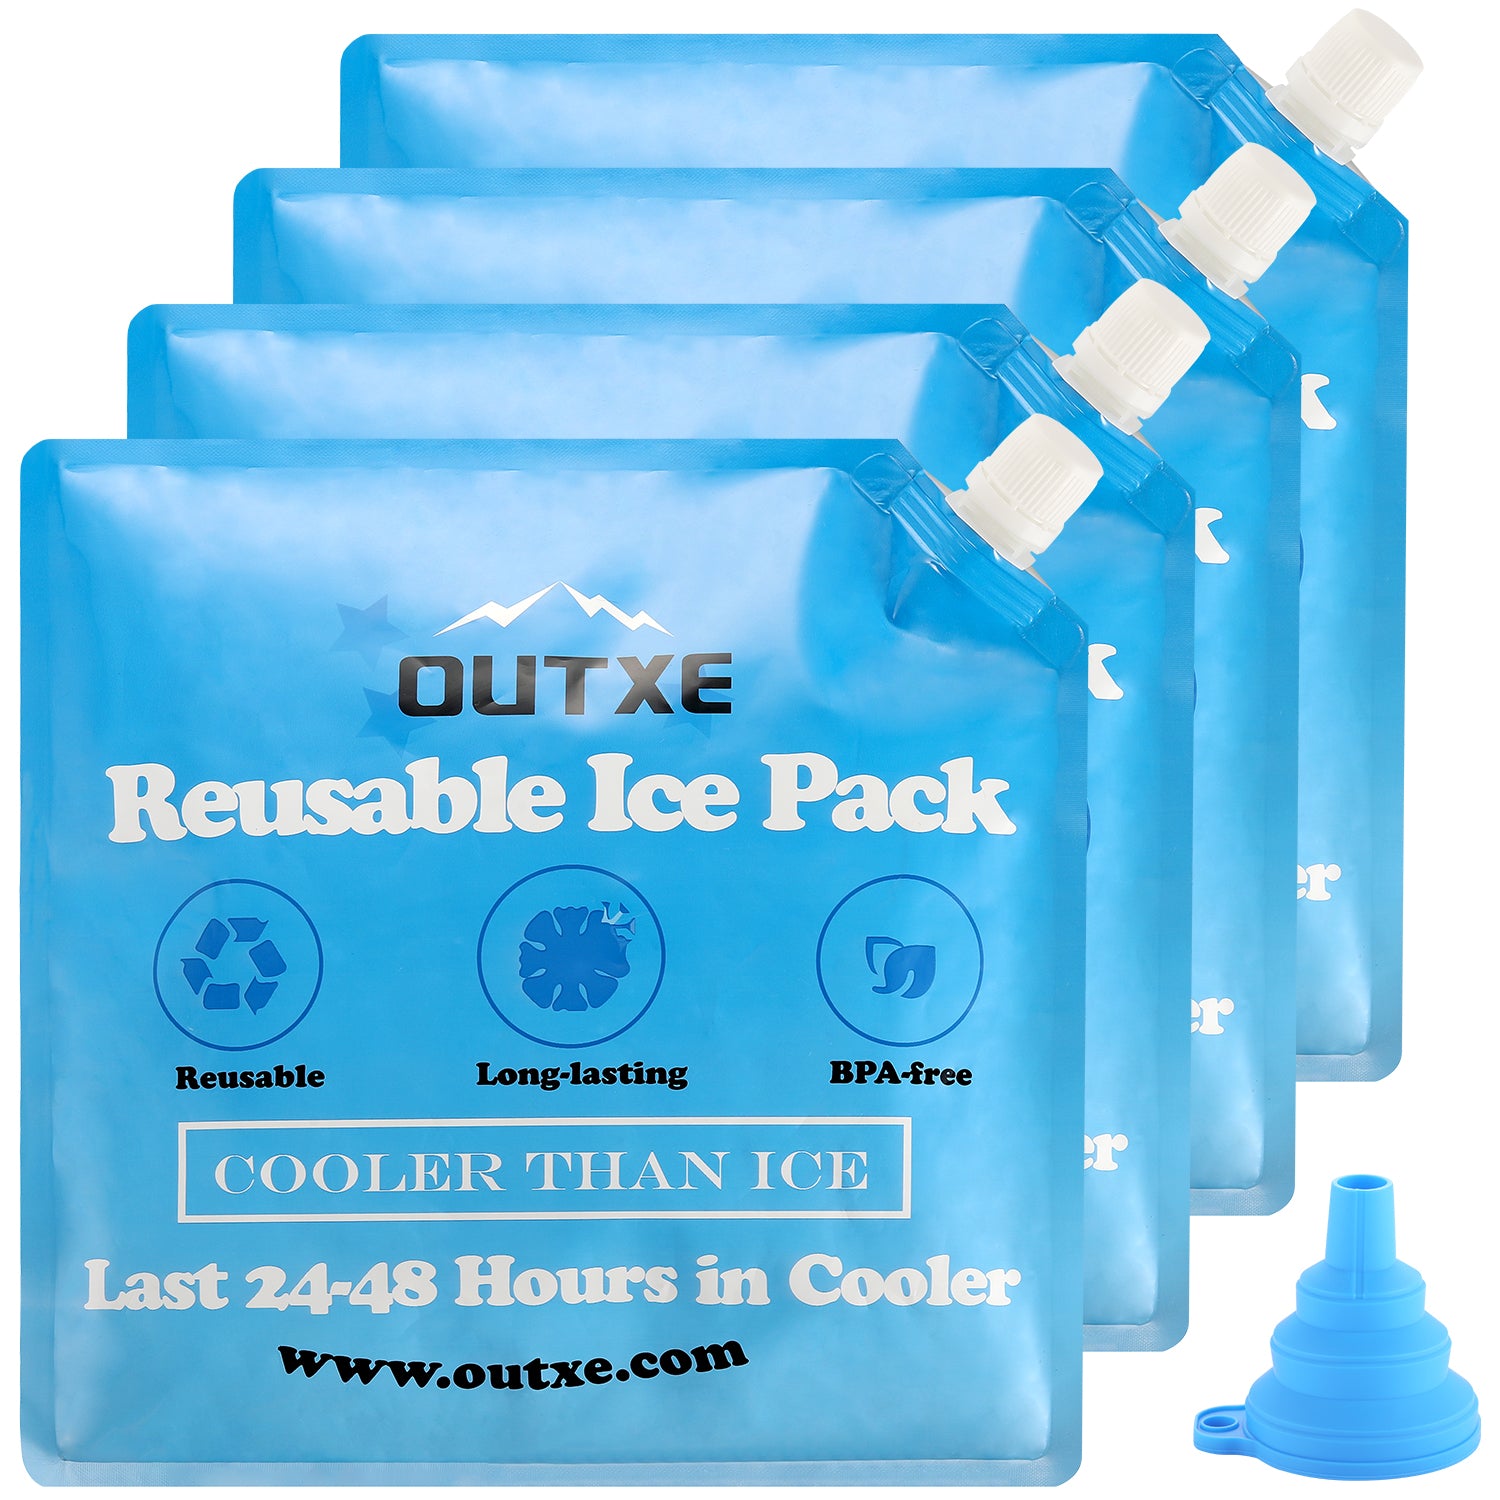 Reusable Ice Cubes Cool Cold Drinks Cooler Party Plastic Freezer Blocks